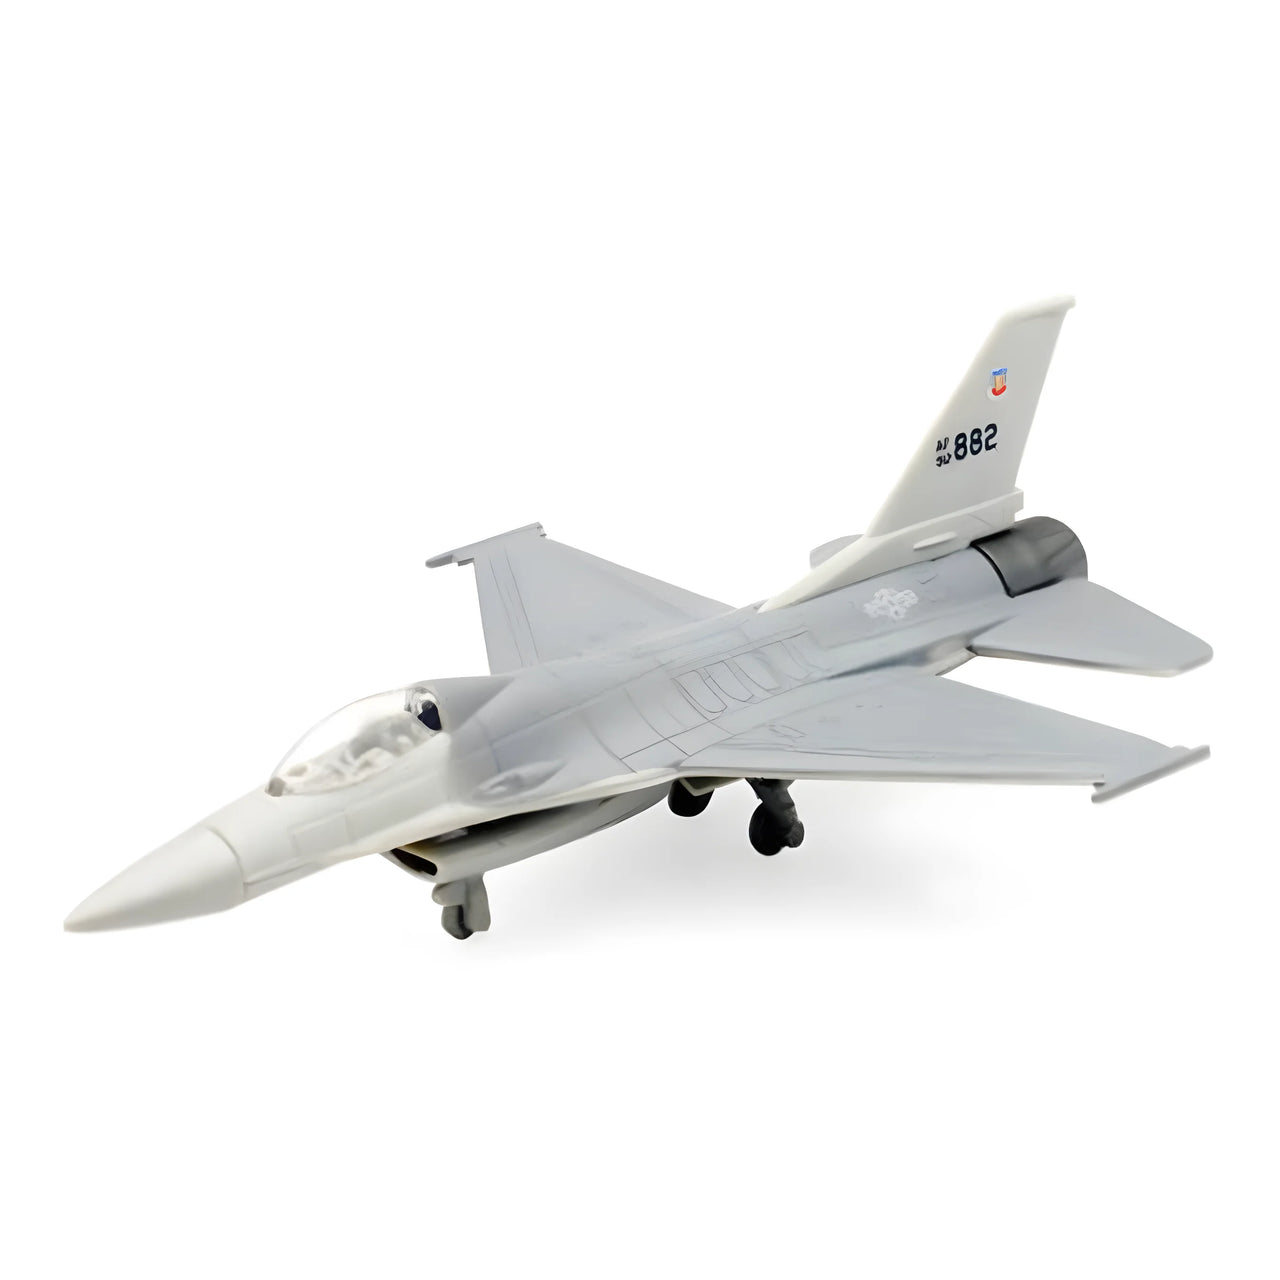 21377-B New Ray F-16 Fighting Falcon Military Plane 1:200 Scale